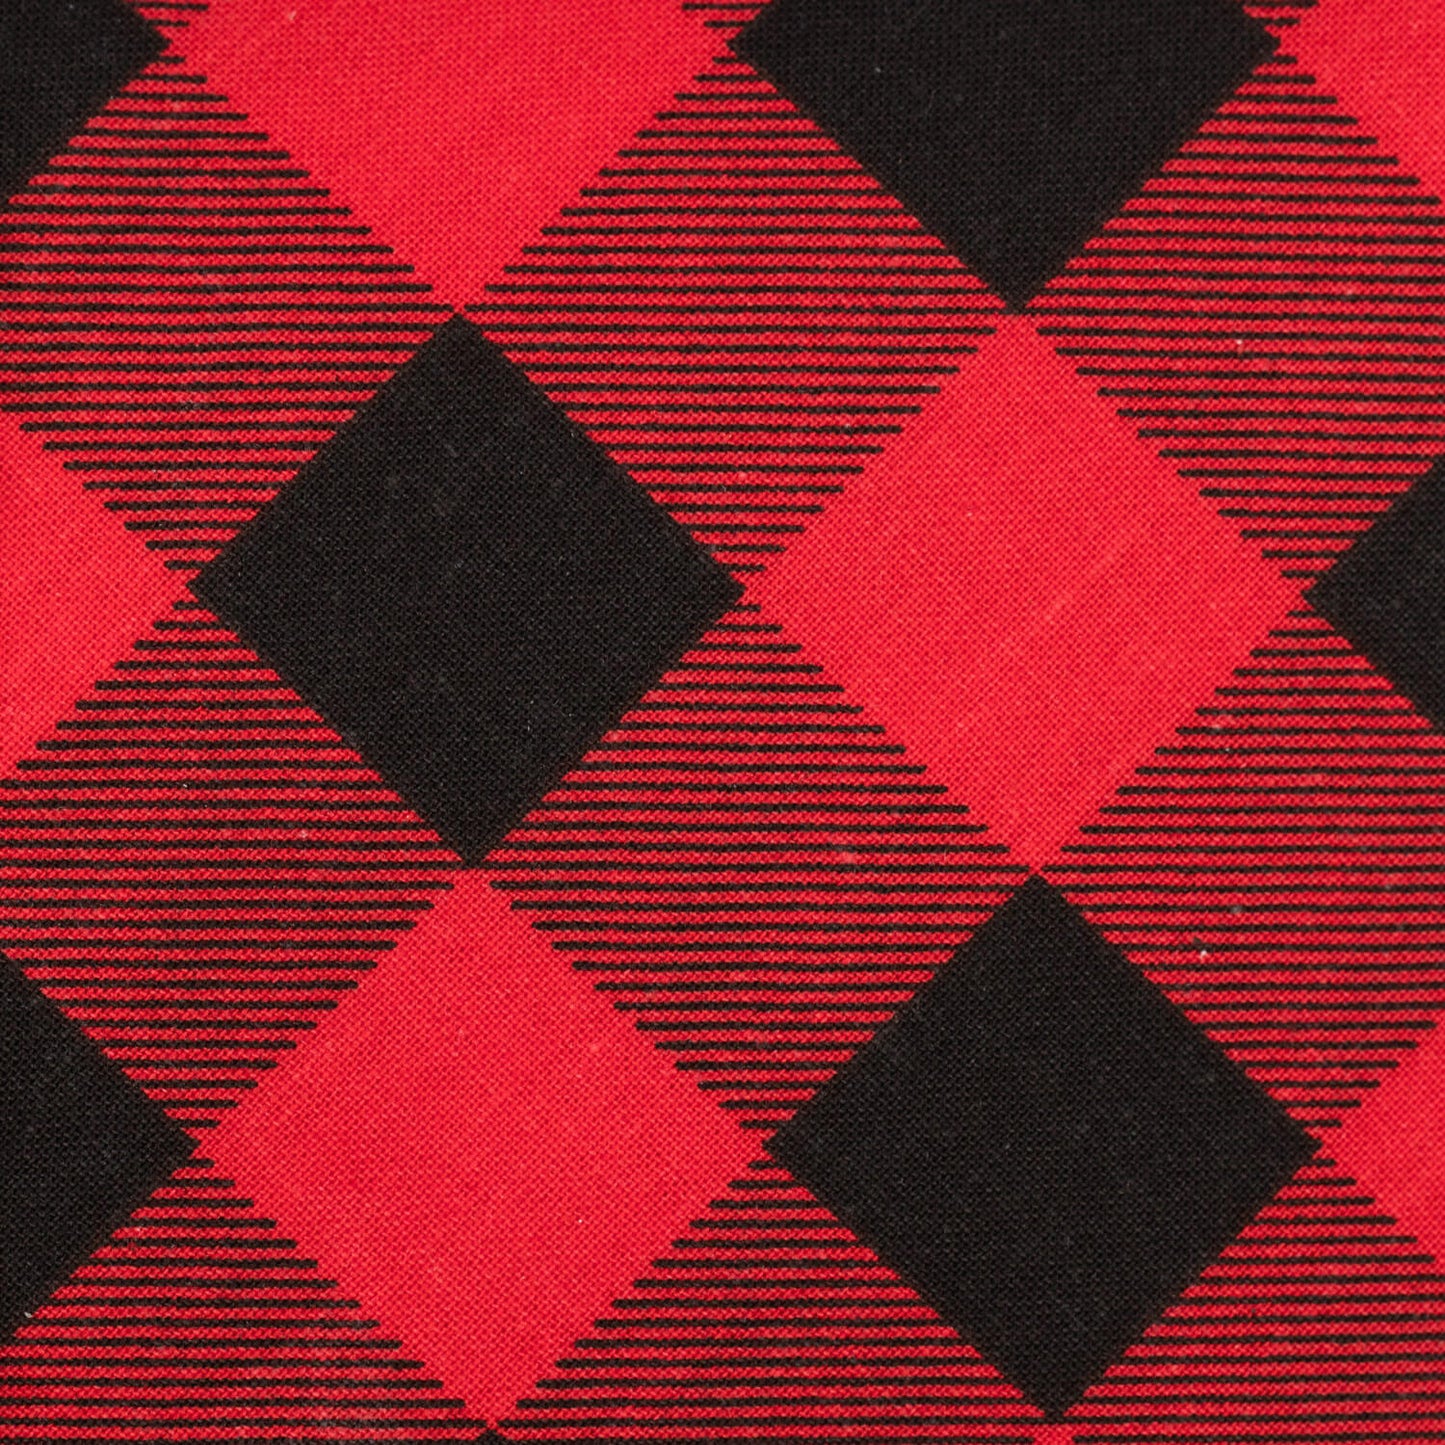 Black and red plaid pattern